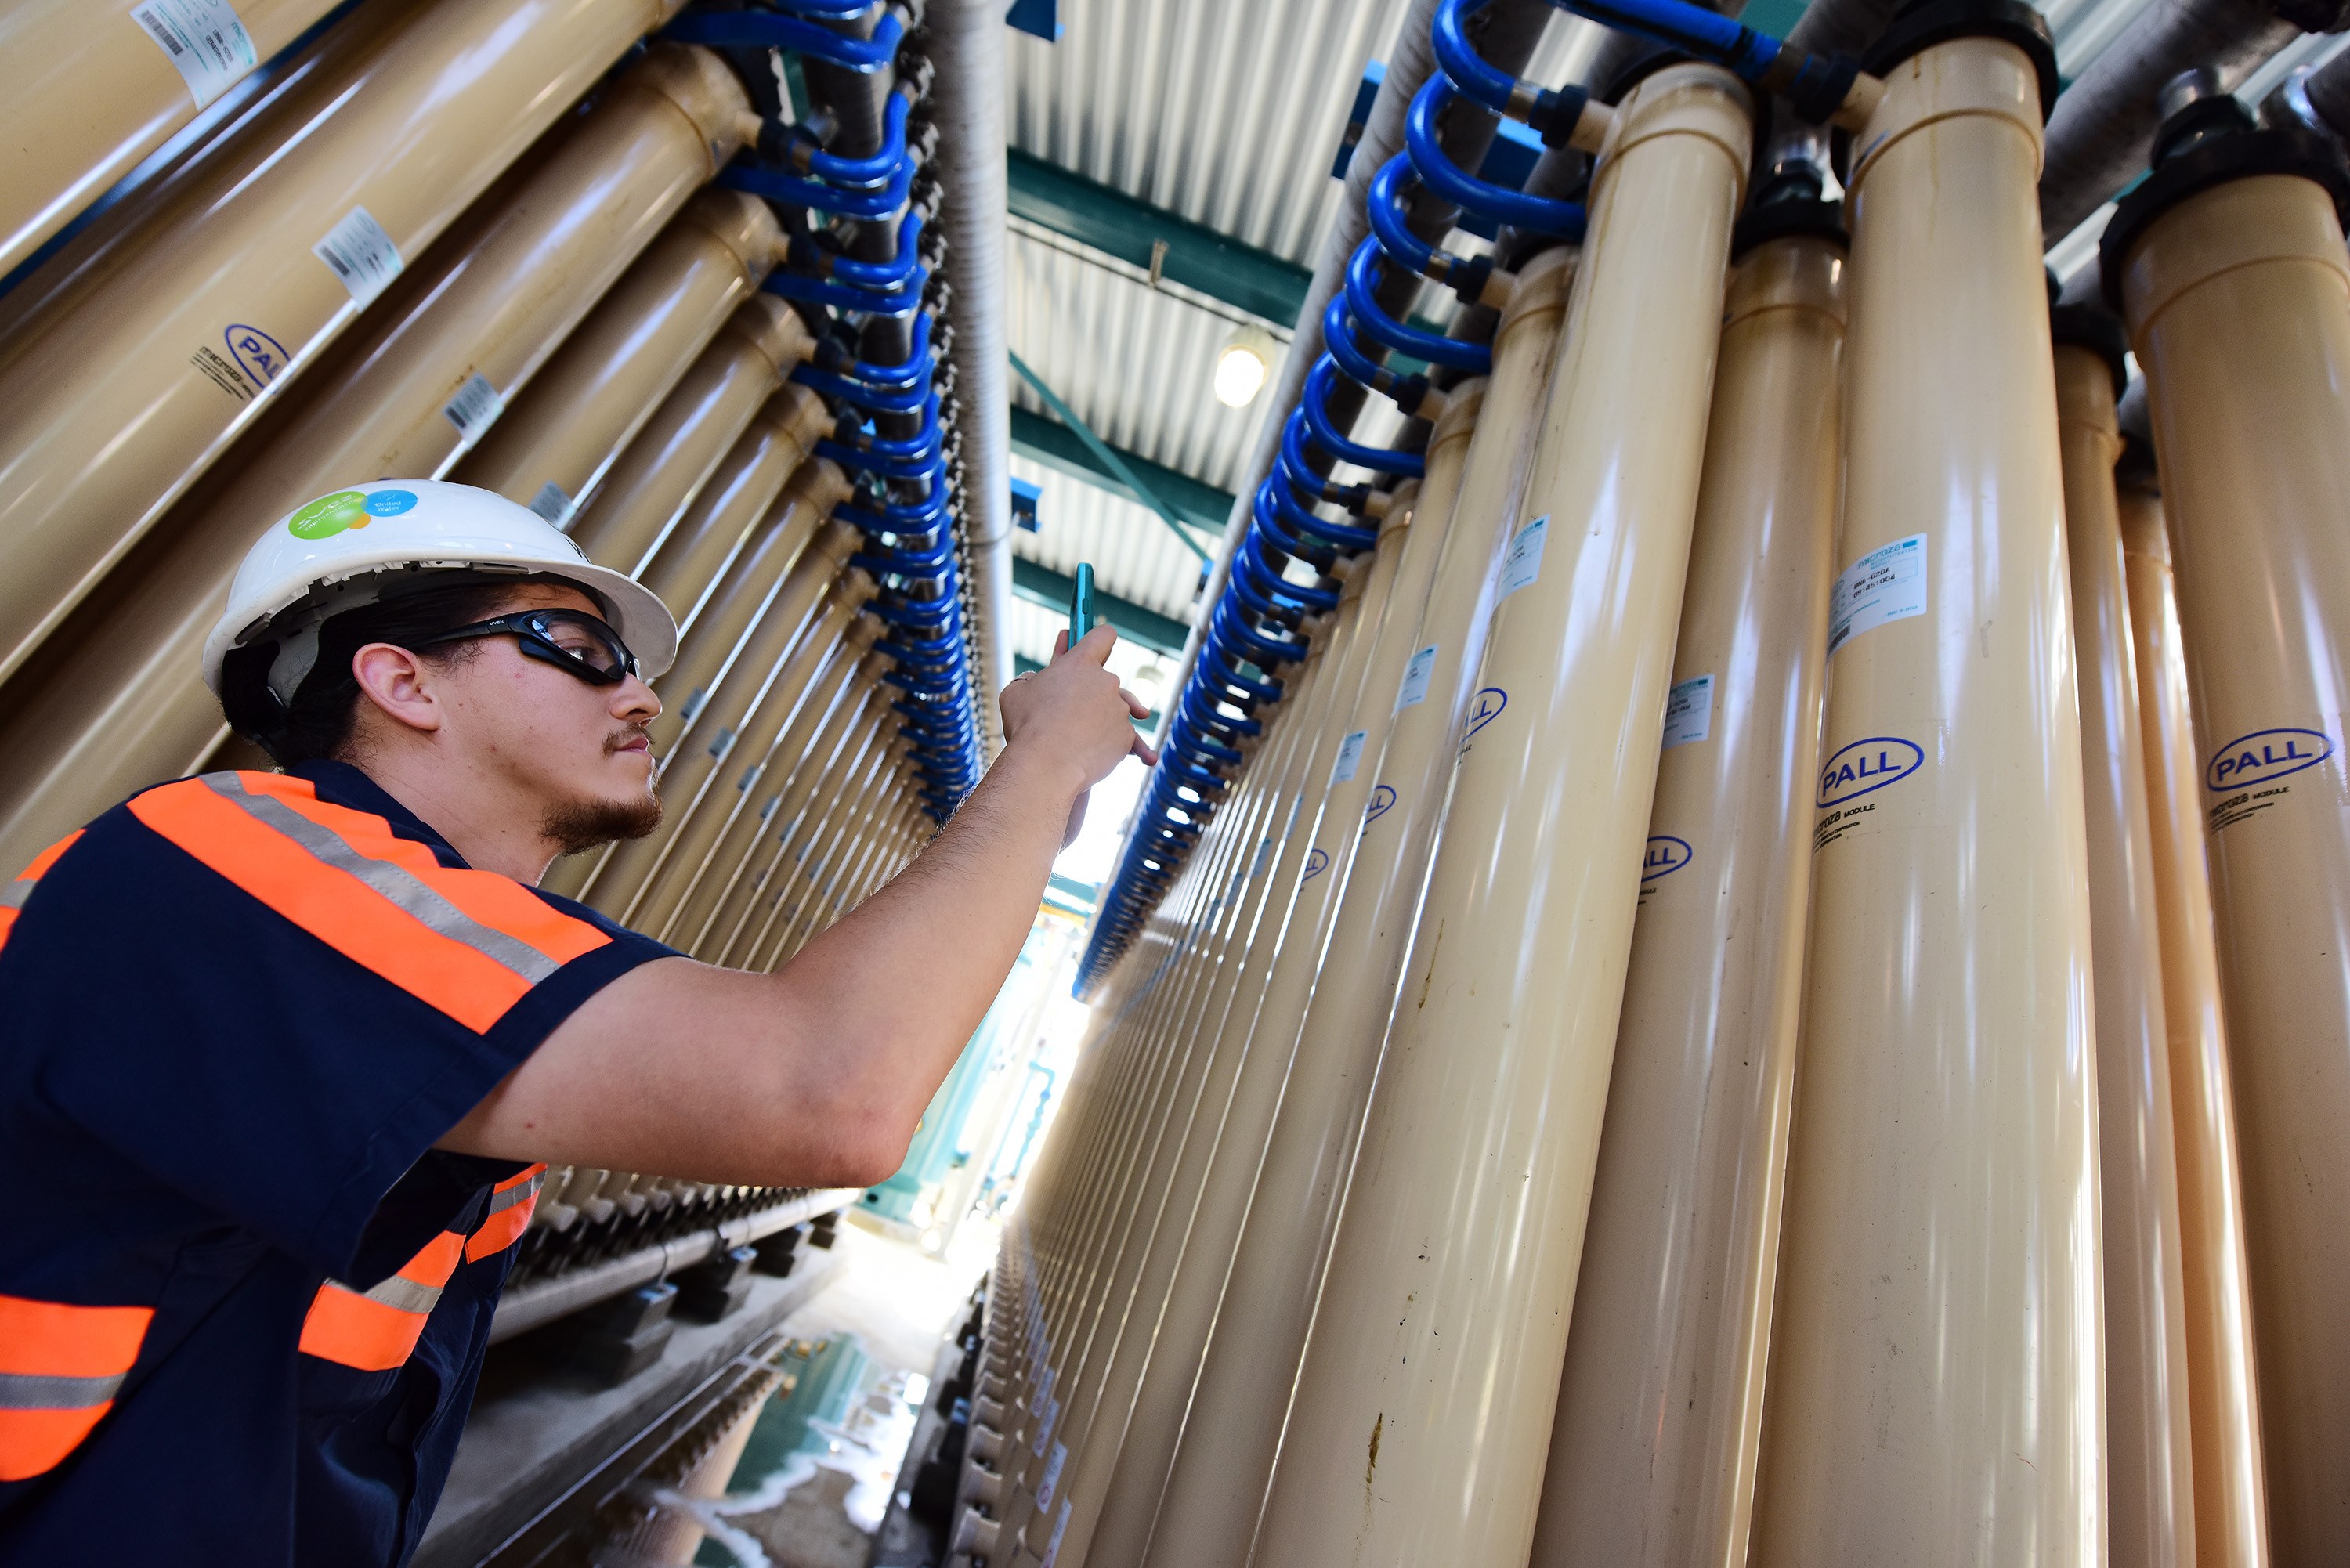 Technician Erick Torres examines micro filter membranes at the West Basin Municipal Water District (WBMWD) water recycling facility in El Segundo, California, September 14, 2015. As drought-stricken California struggles with water conservation, West Basin employs a three-part water purification system involving microfiltration, reverse osmosis and ultraviolet light treatment to transform waste water into potable water. The finished product is then sent underground to replenish the areas aquifers where it mixes with the natural underground water supply which feeds wells. Critics call the method toilet to tap but the final product is more pure than tap or bottled water and exceeds all state and federal drinking water standards according to WBMWD. AFP PHOTO / ROBYN BECK. AFP PHOTO / ROBYN BECK (Photo credit should read ROBYN BECK/AFP via Getty Images)